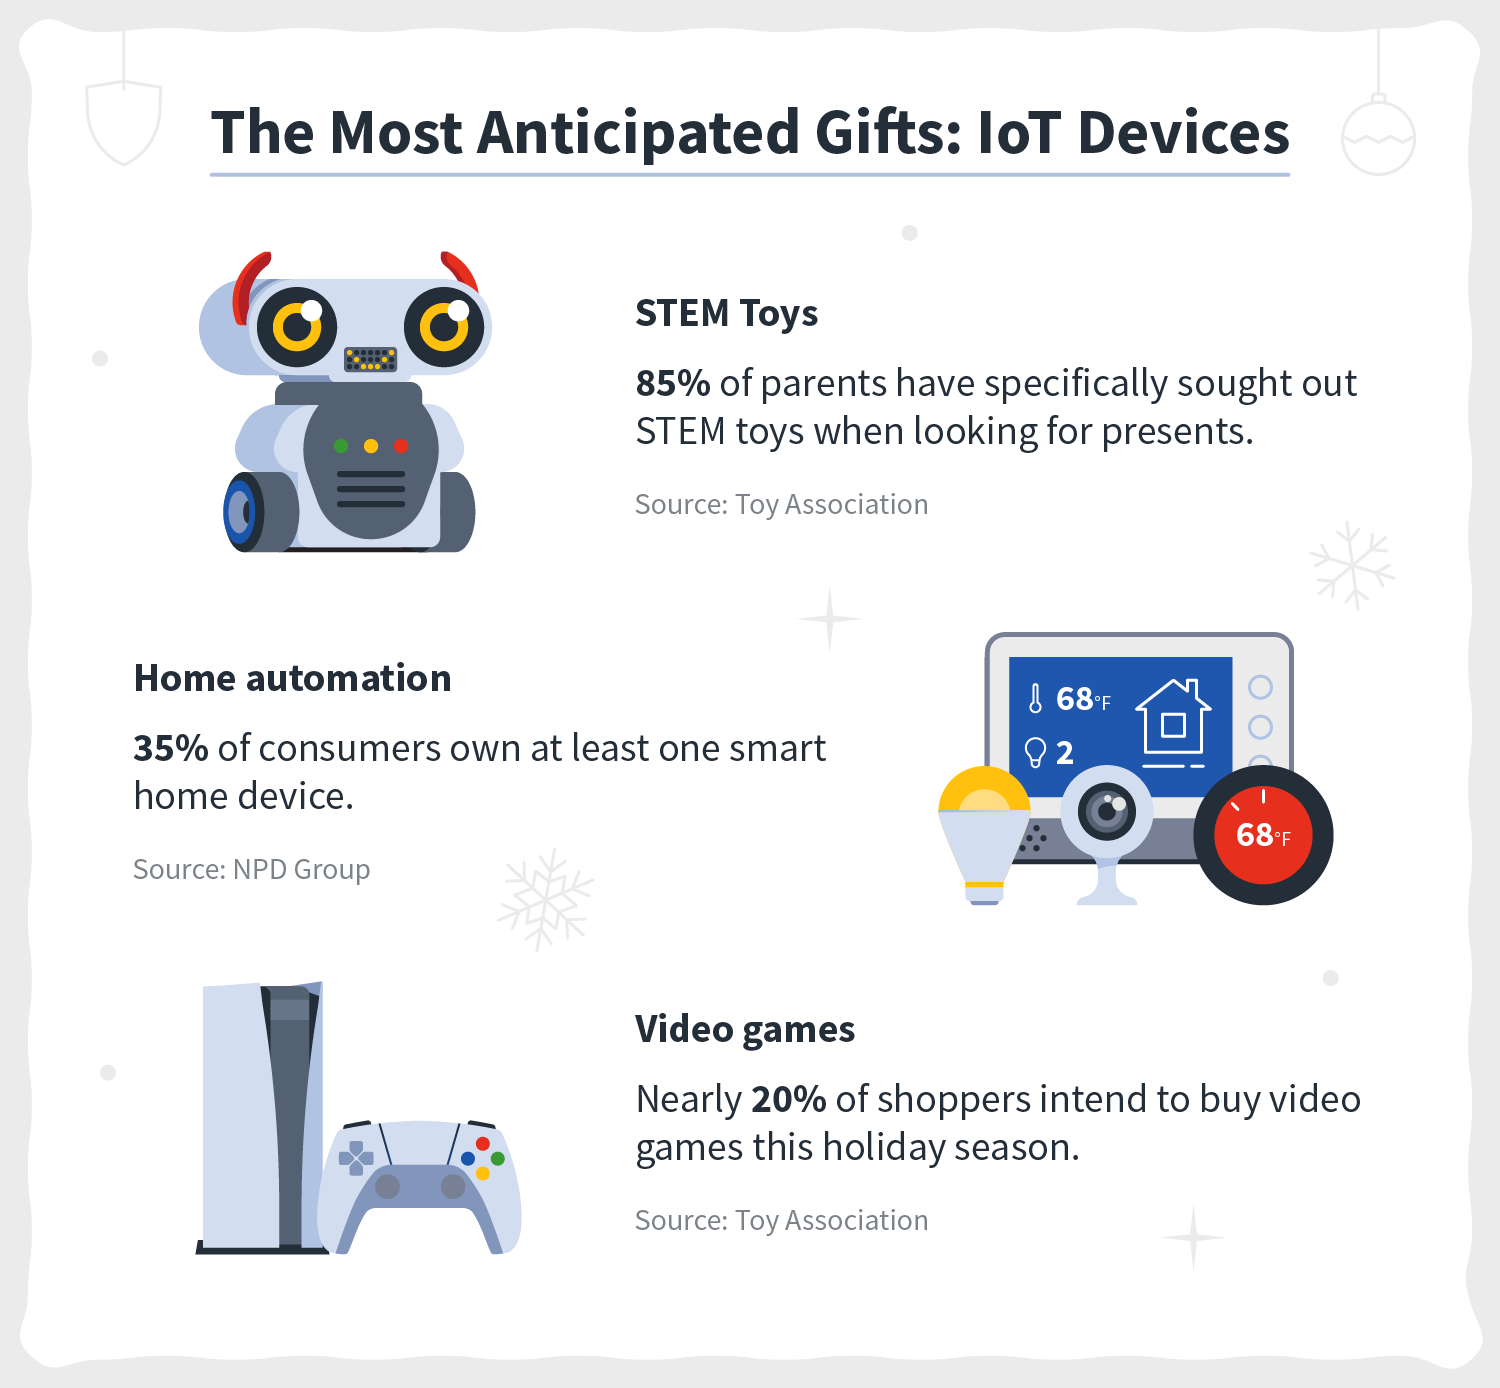 Holiday shopping statistics accompany three illustrations to highlight the popularity of IoT devices and the importance of IoT device security. 